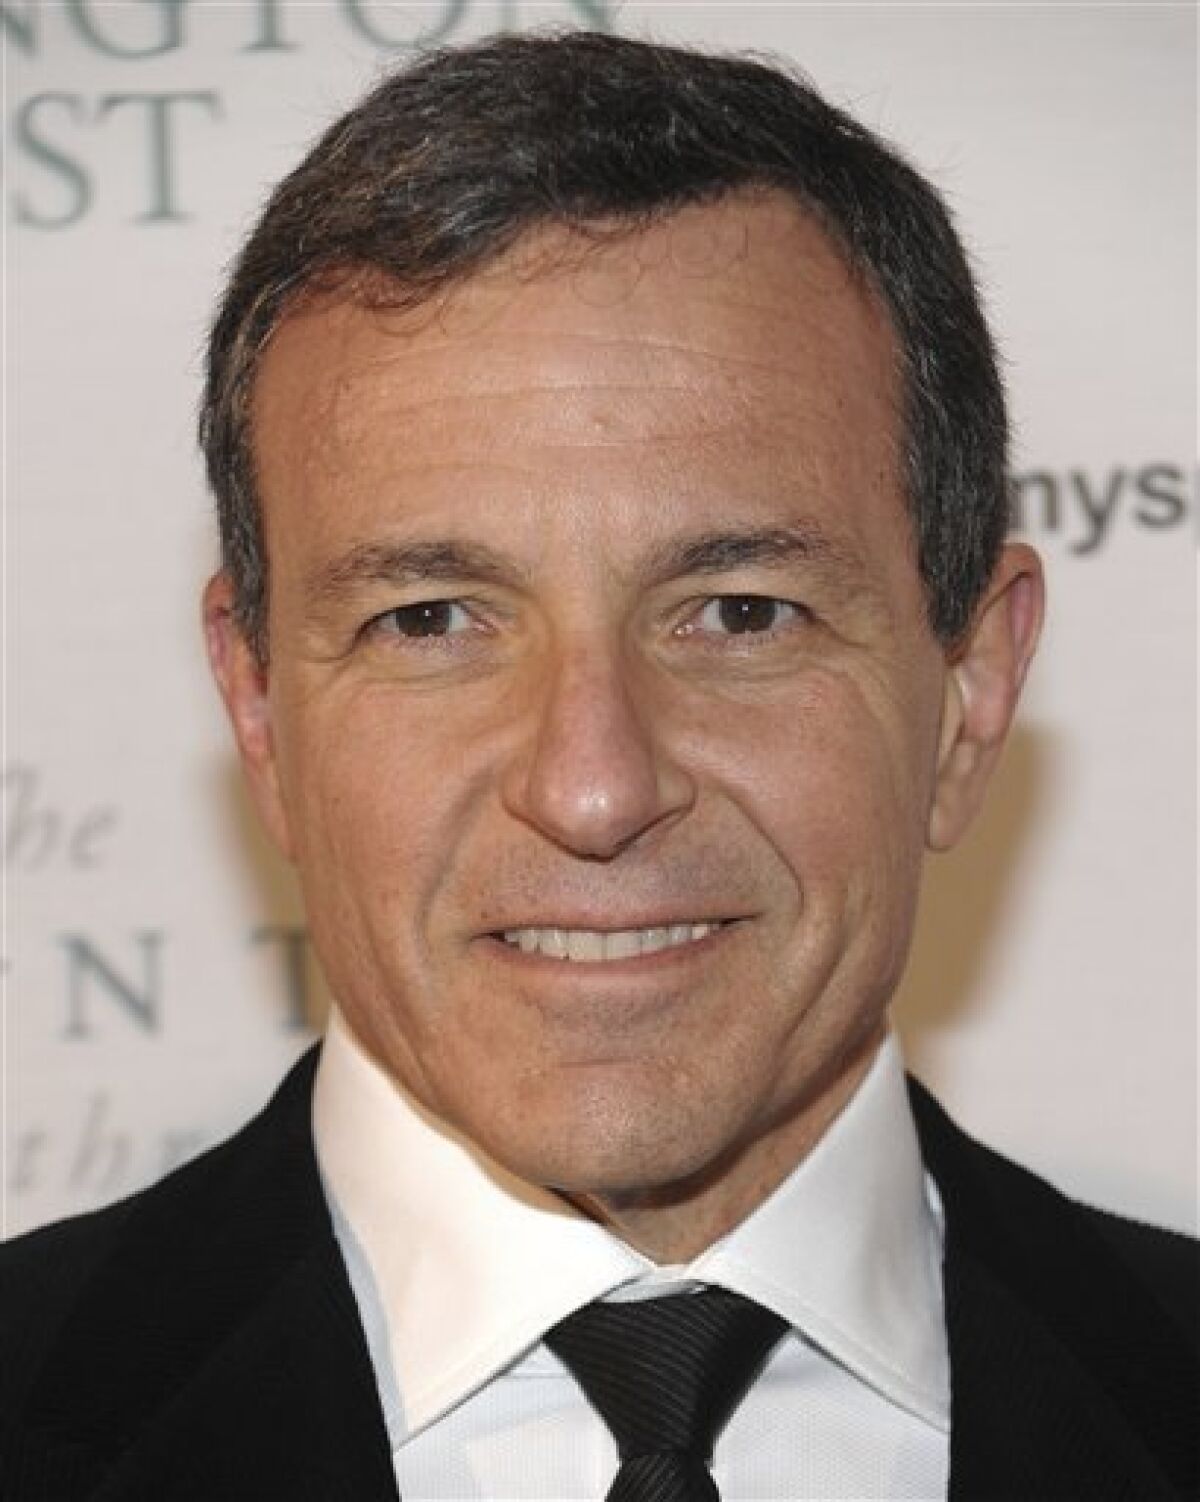 FILE - In this Jan. 19, 2009 file photo, Walt Disney Company president and CEO Robert Iger attends the Huffington Post Pre-Inaugural Ball at the Newseum in Washington. (AP Photo/Evan Agostini, file)